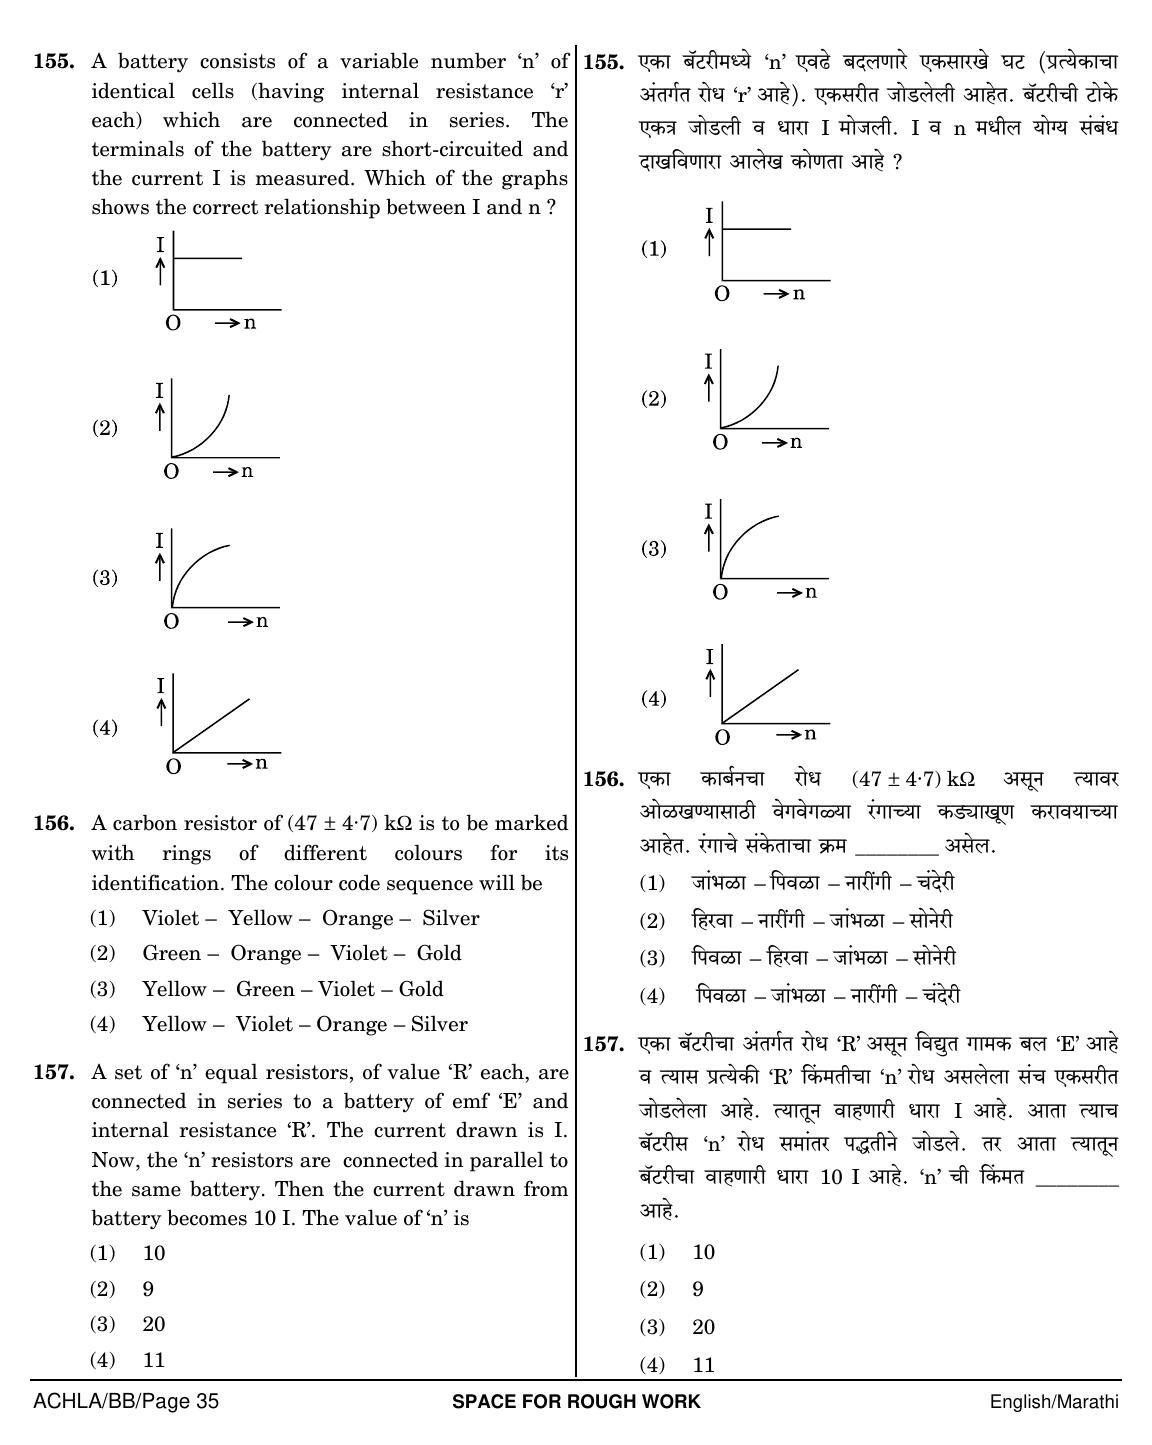 NEET Marathi BB 2018 Question Paper - Page 35